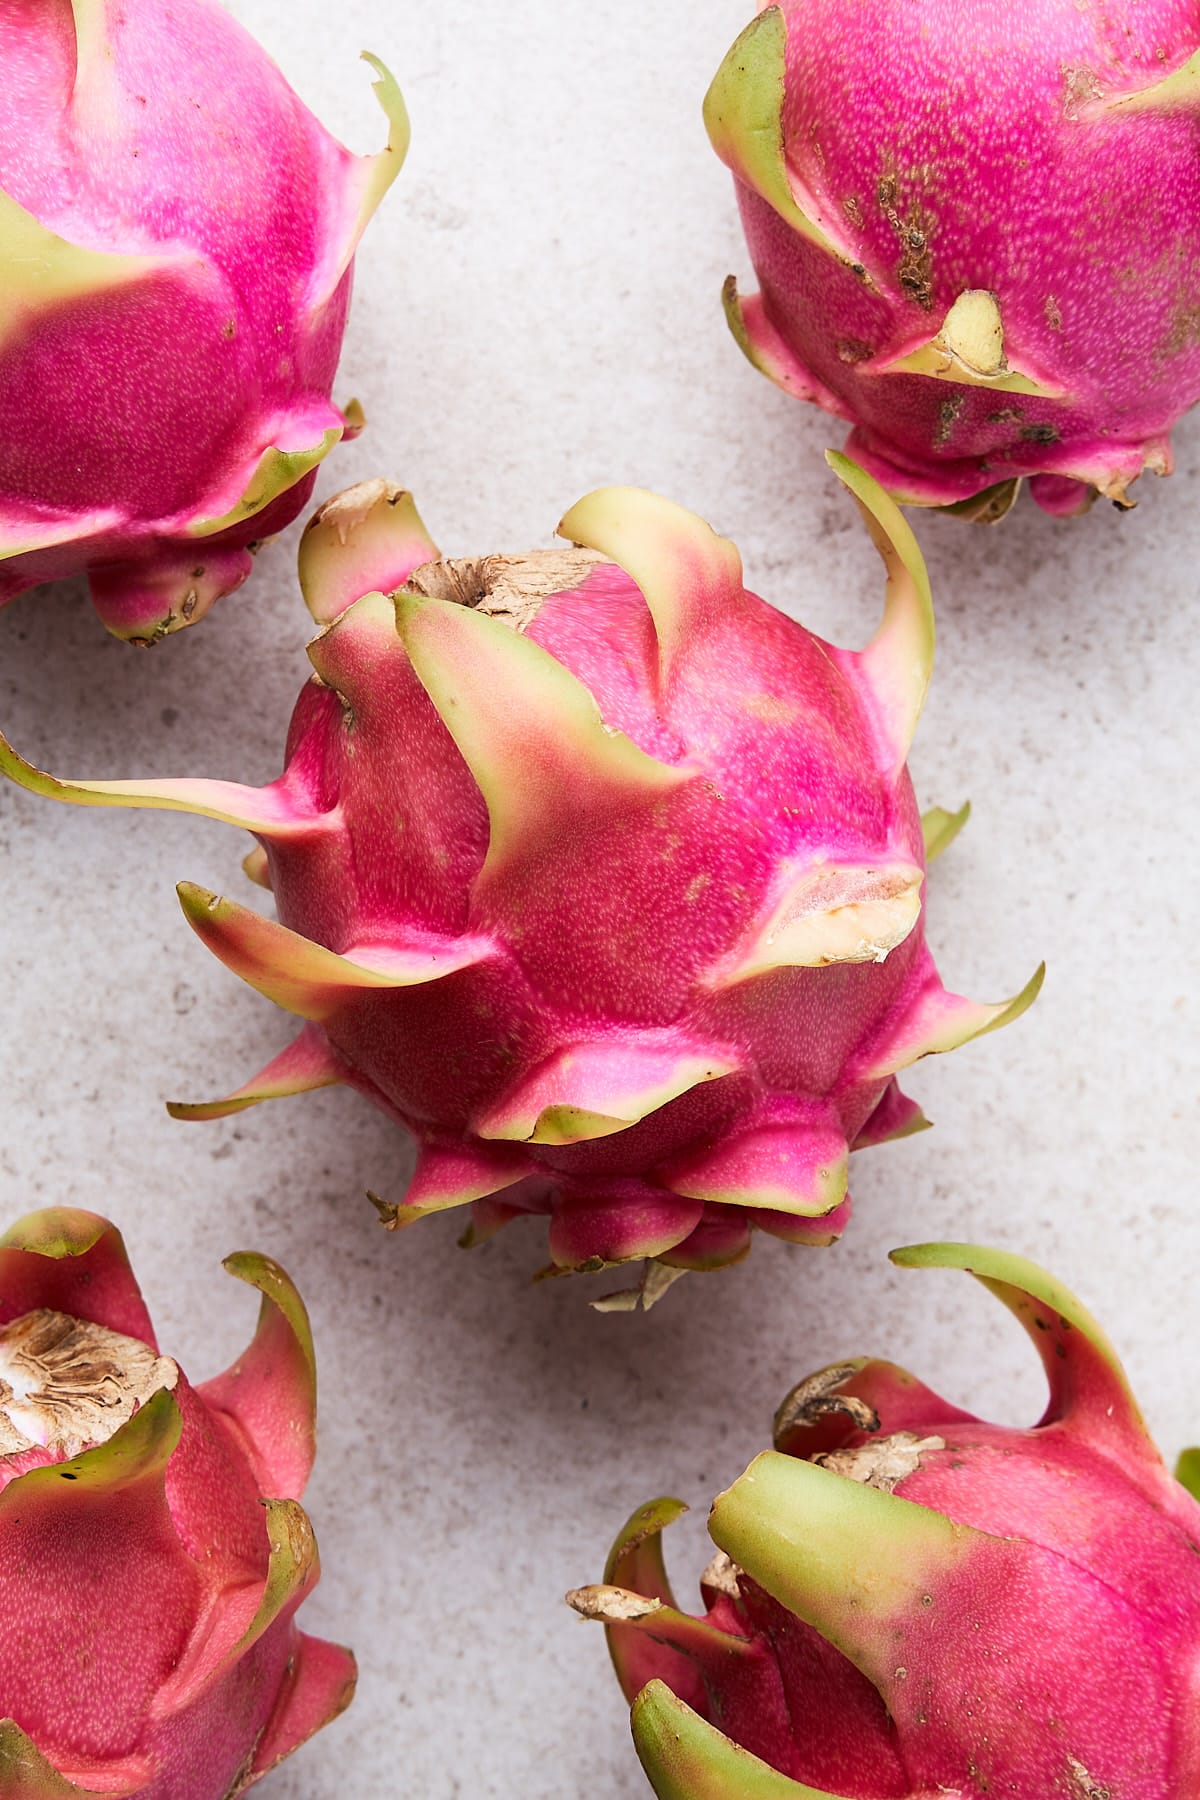 Dragonfruits on a counter